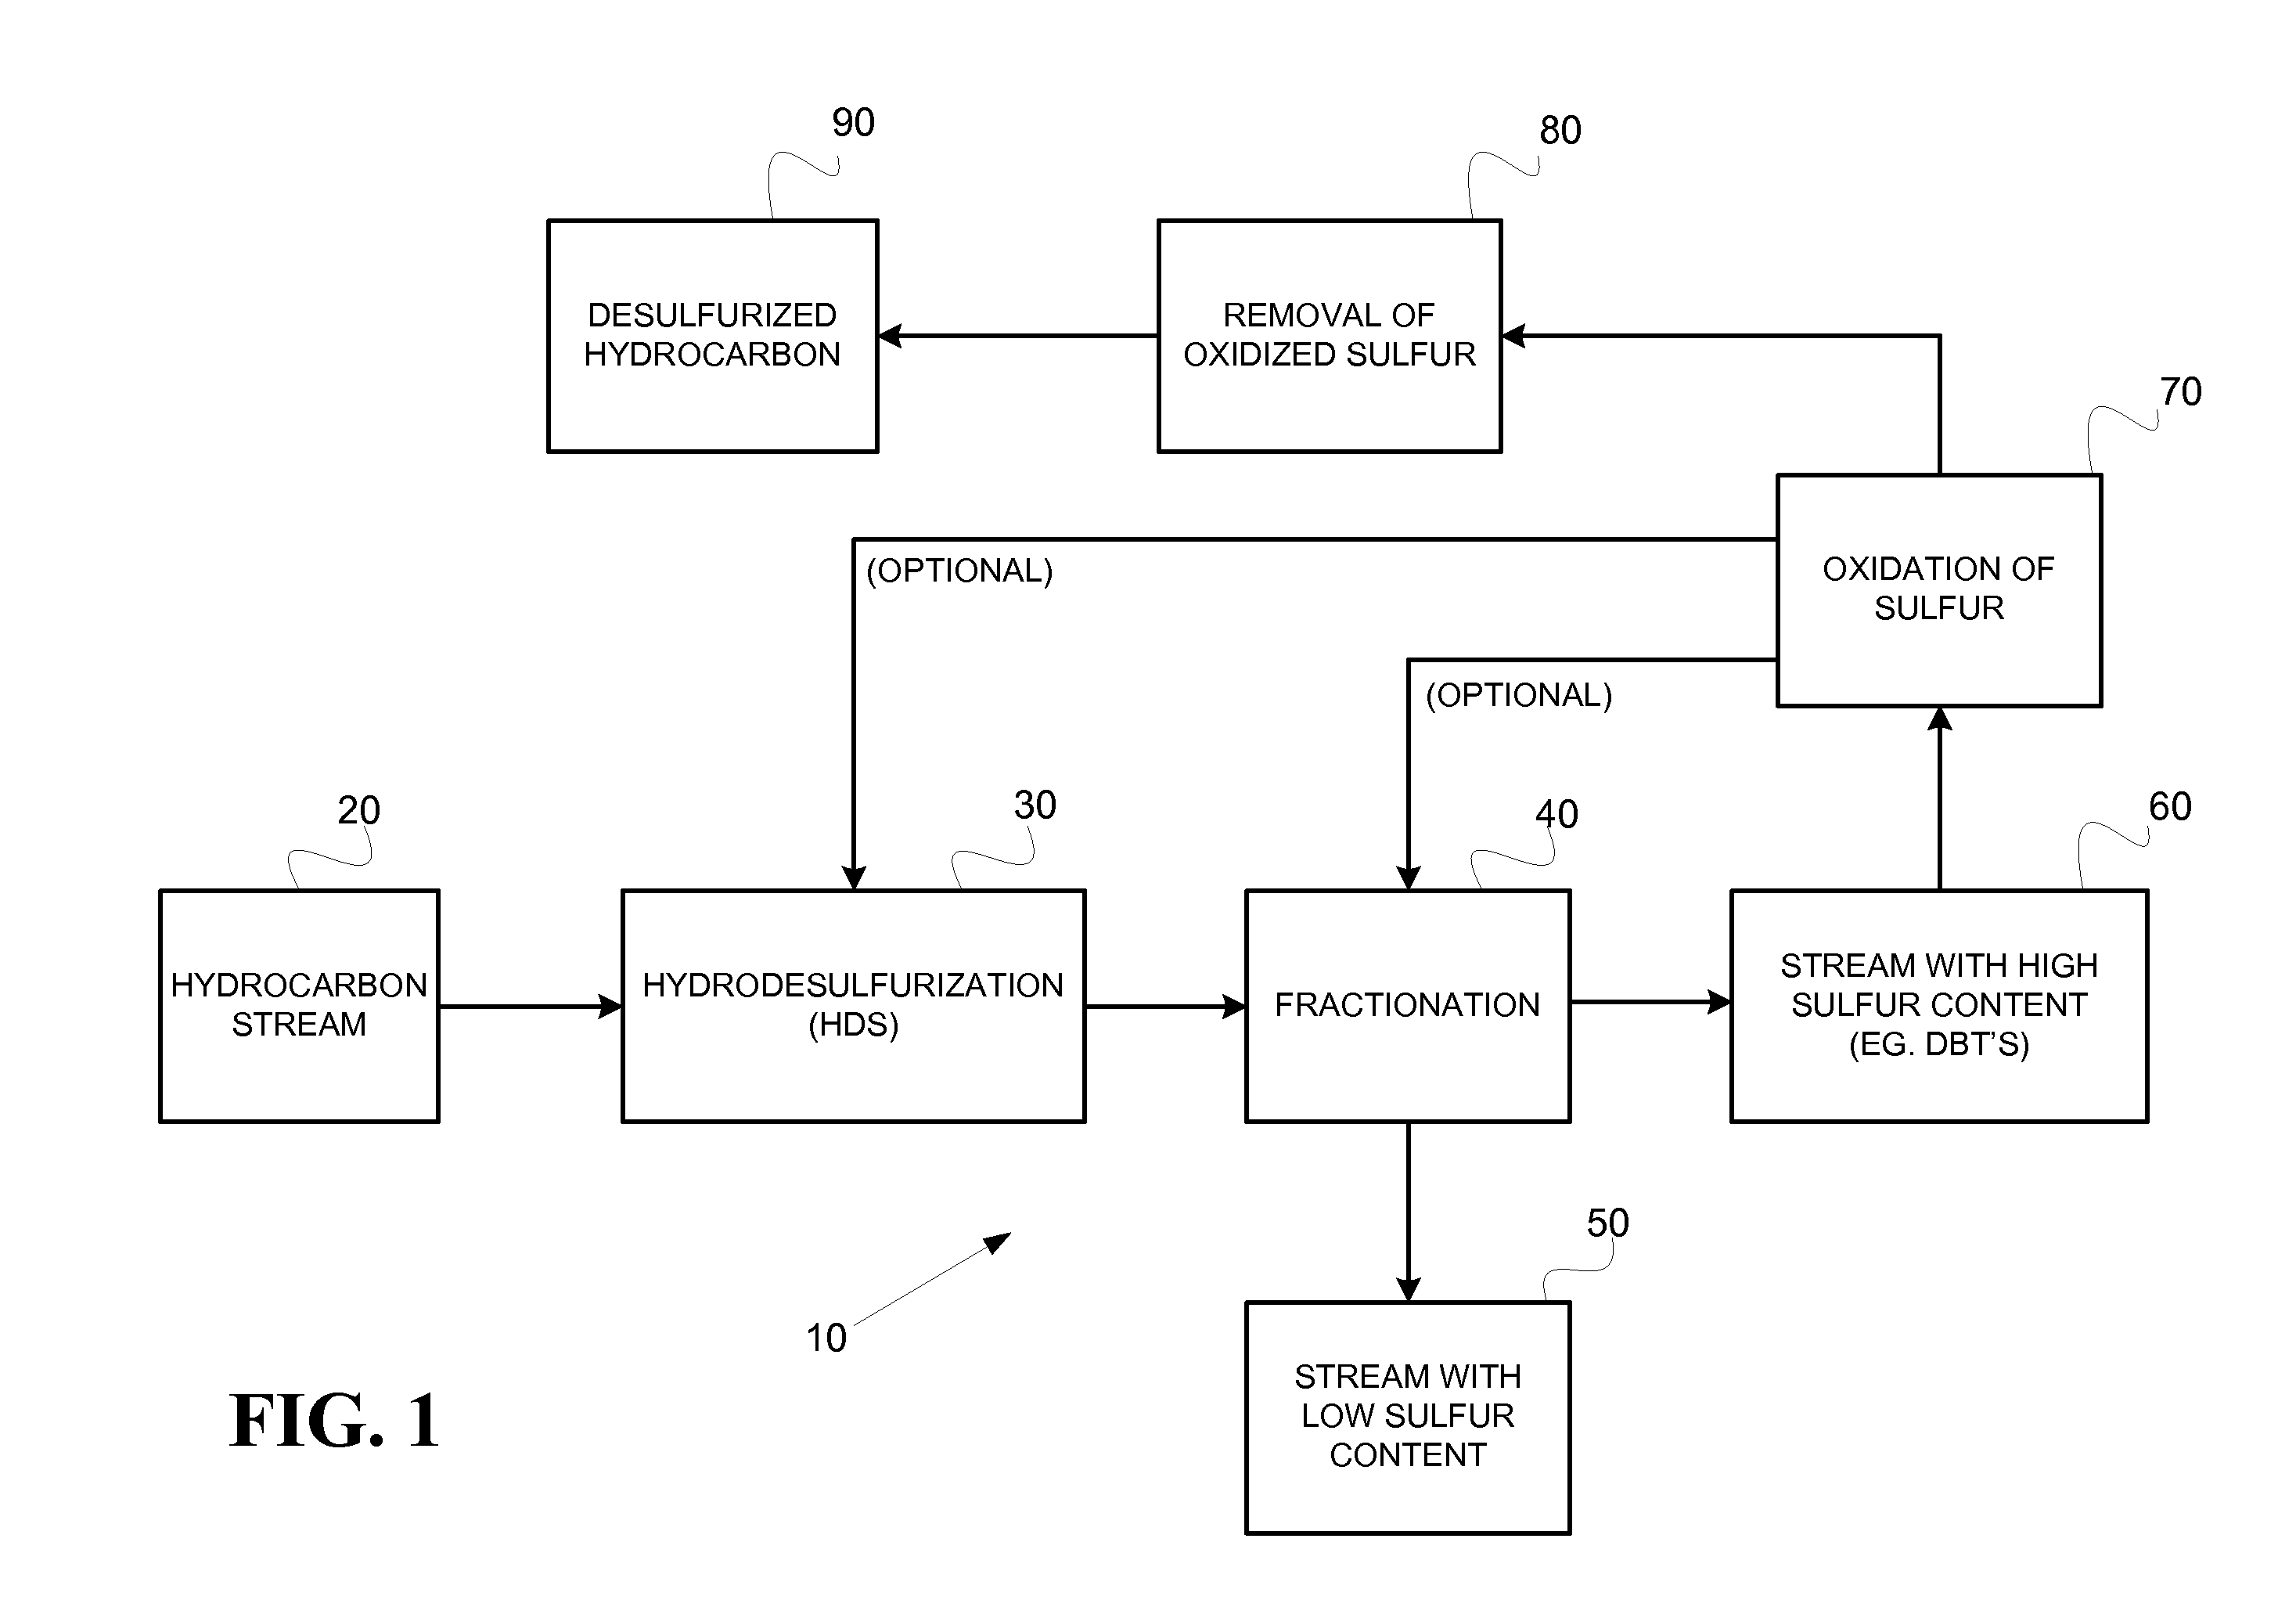 Process for removing sulfur from hydrocarbon streams using hydrotreatment, fractionation and oxidation